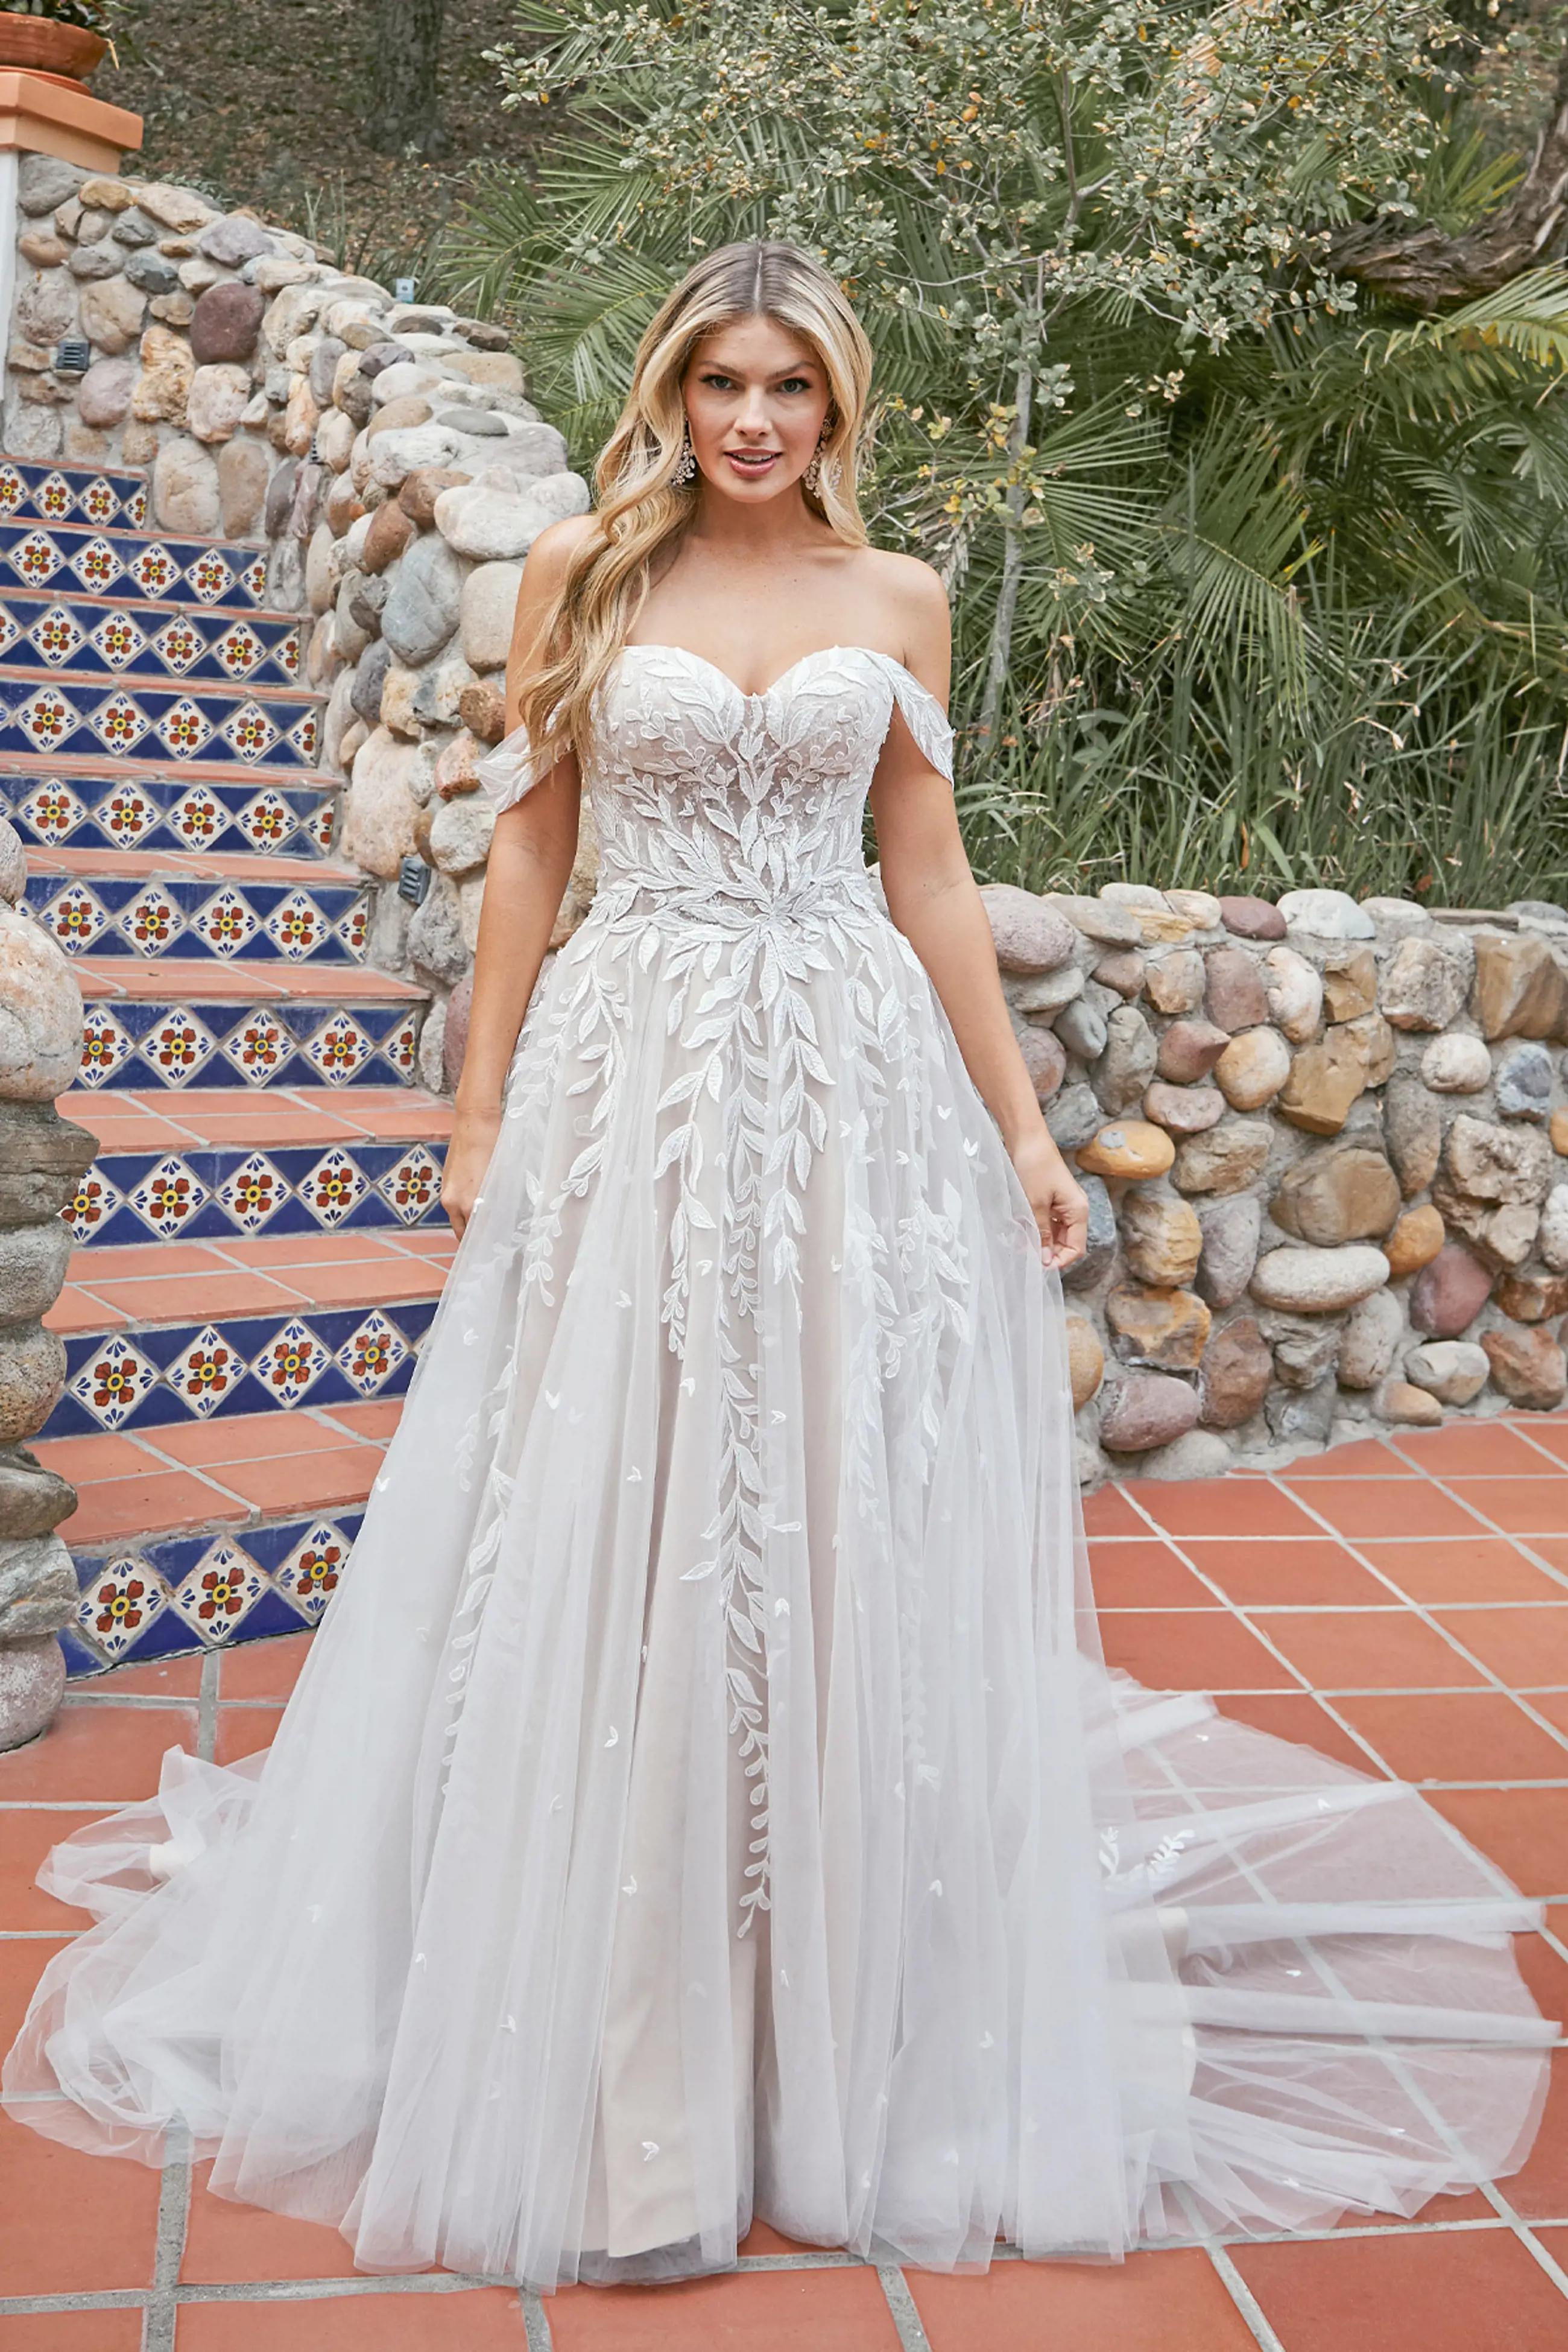 Bridal Gowns Perfect For Your Fall Wedding Image